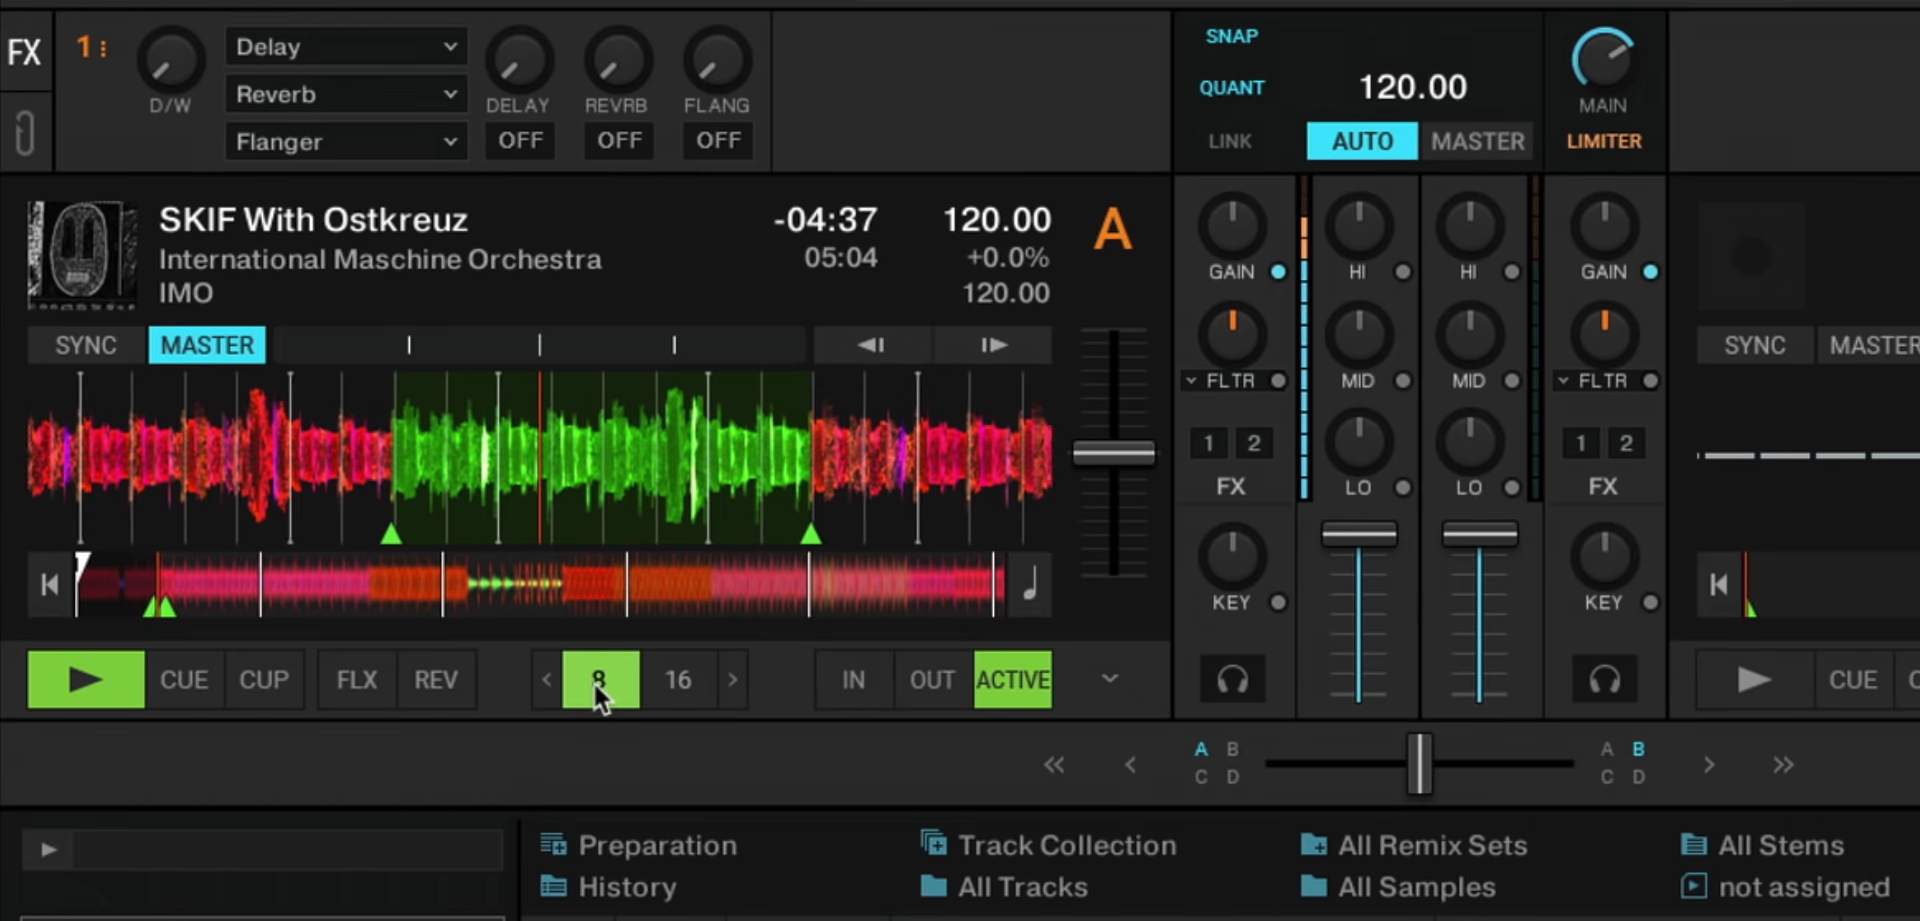 blik Lav aftensmad For nylig 10 Best Audio Mixer Software for Mixing and Editing Sound